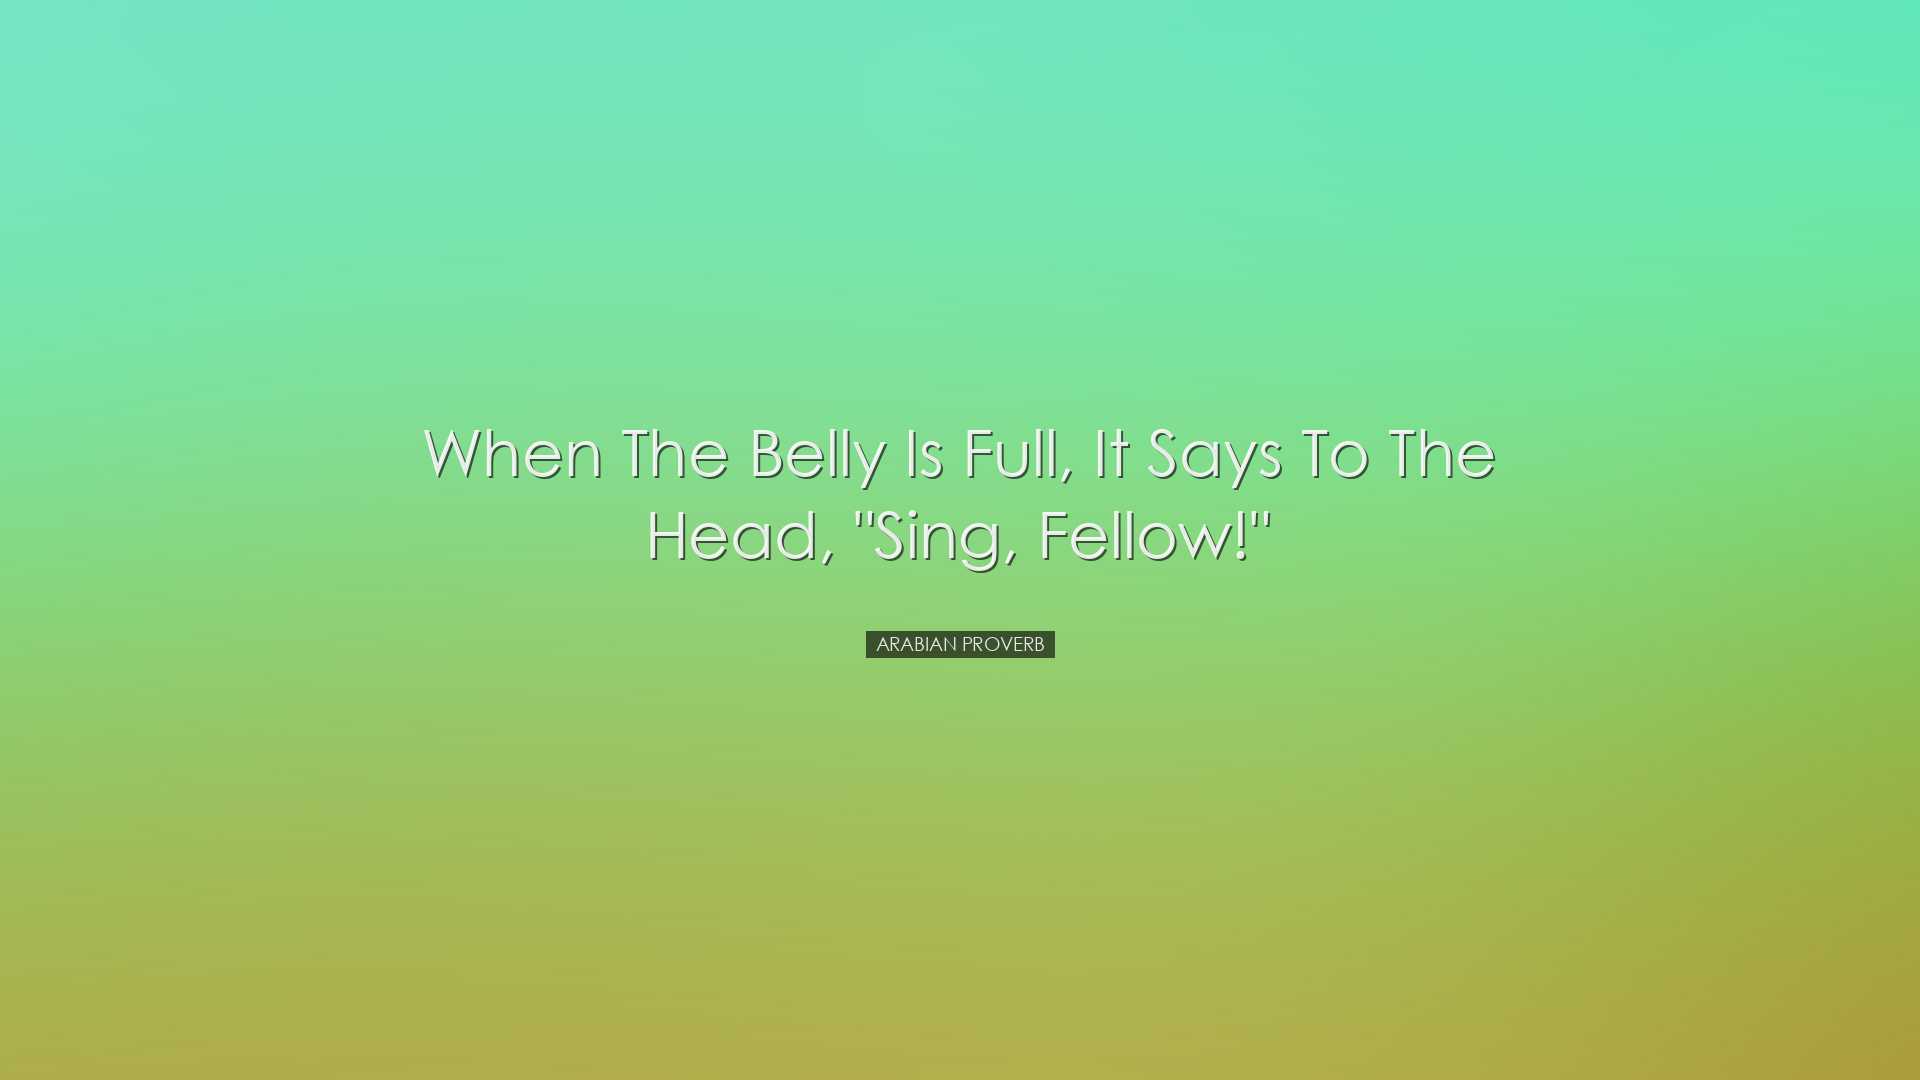 When the belly is full, it says to the head, 